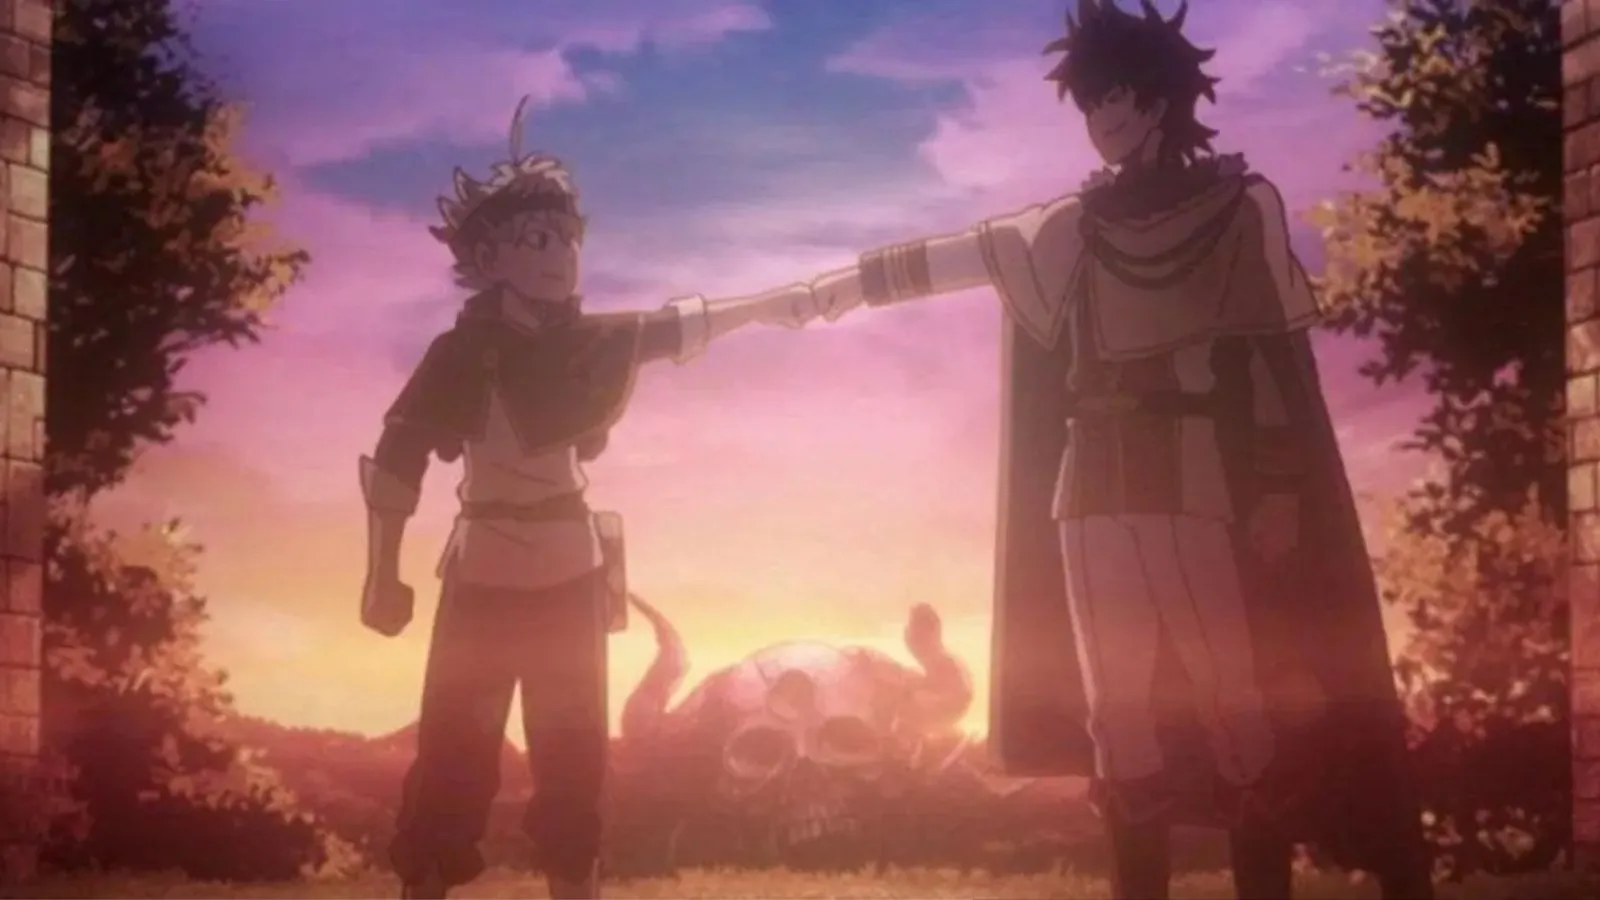 Black Clover movie releases character teaser on former Wizard Kings